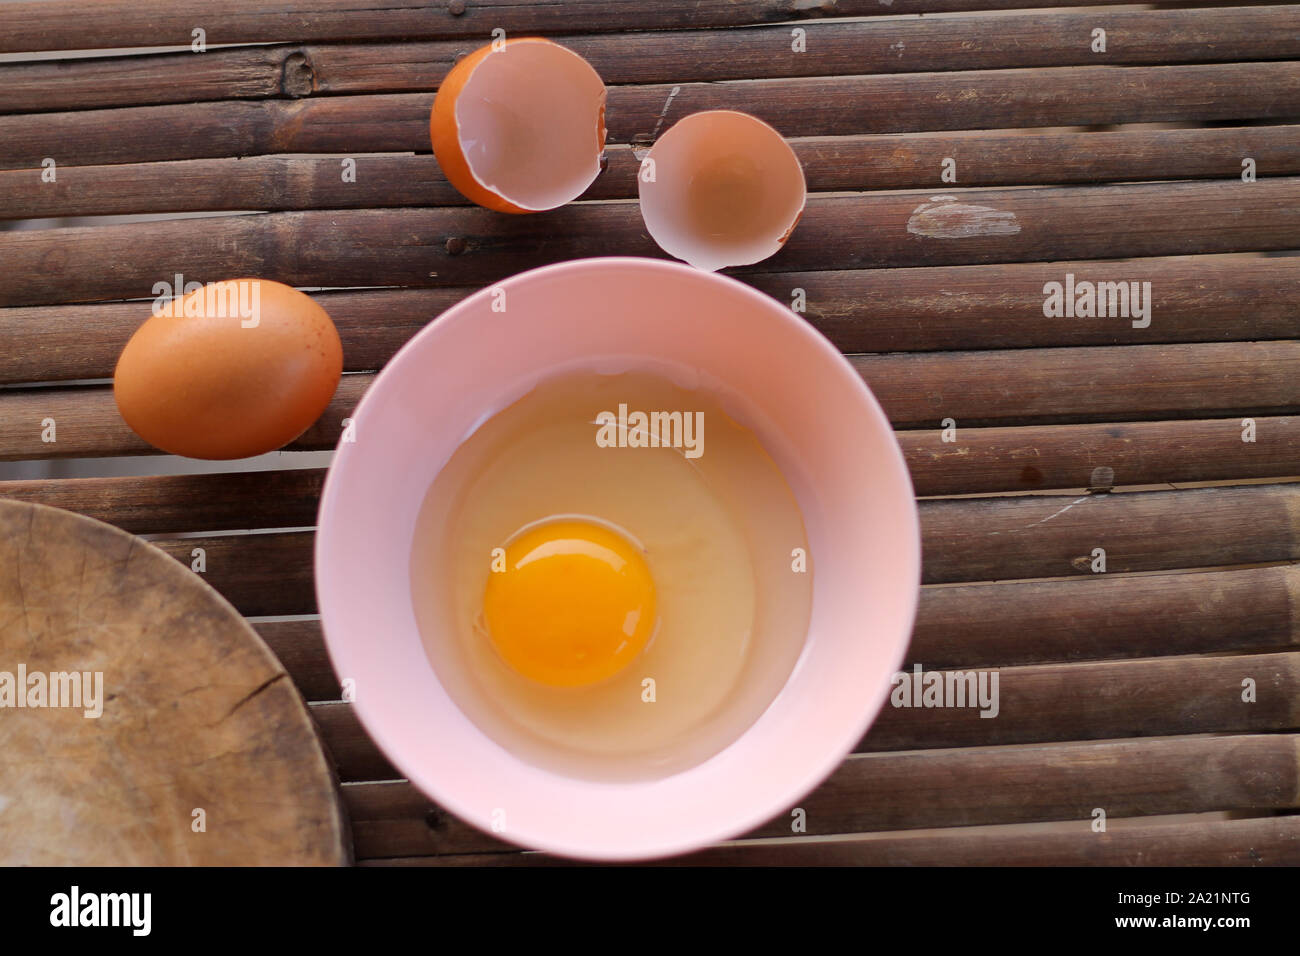 shell with egg and open Eggs in a pink bowl Placed near to the butcher on Bamboo battens.Top view closeup. Stock Photo